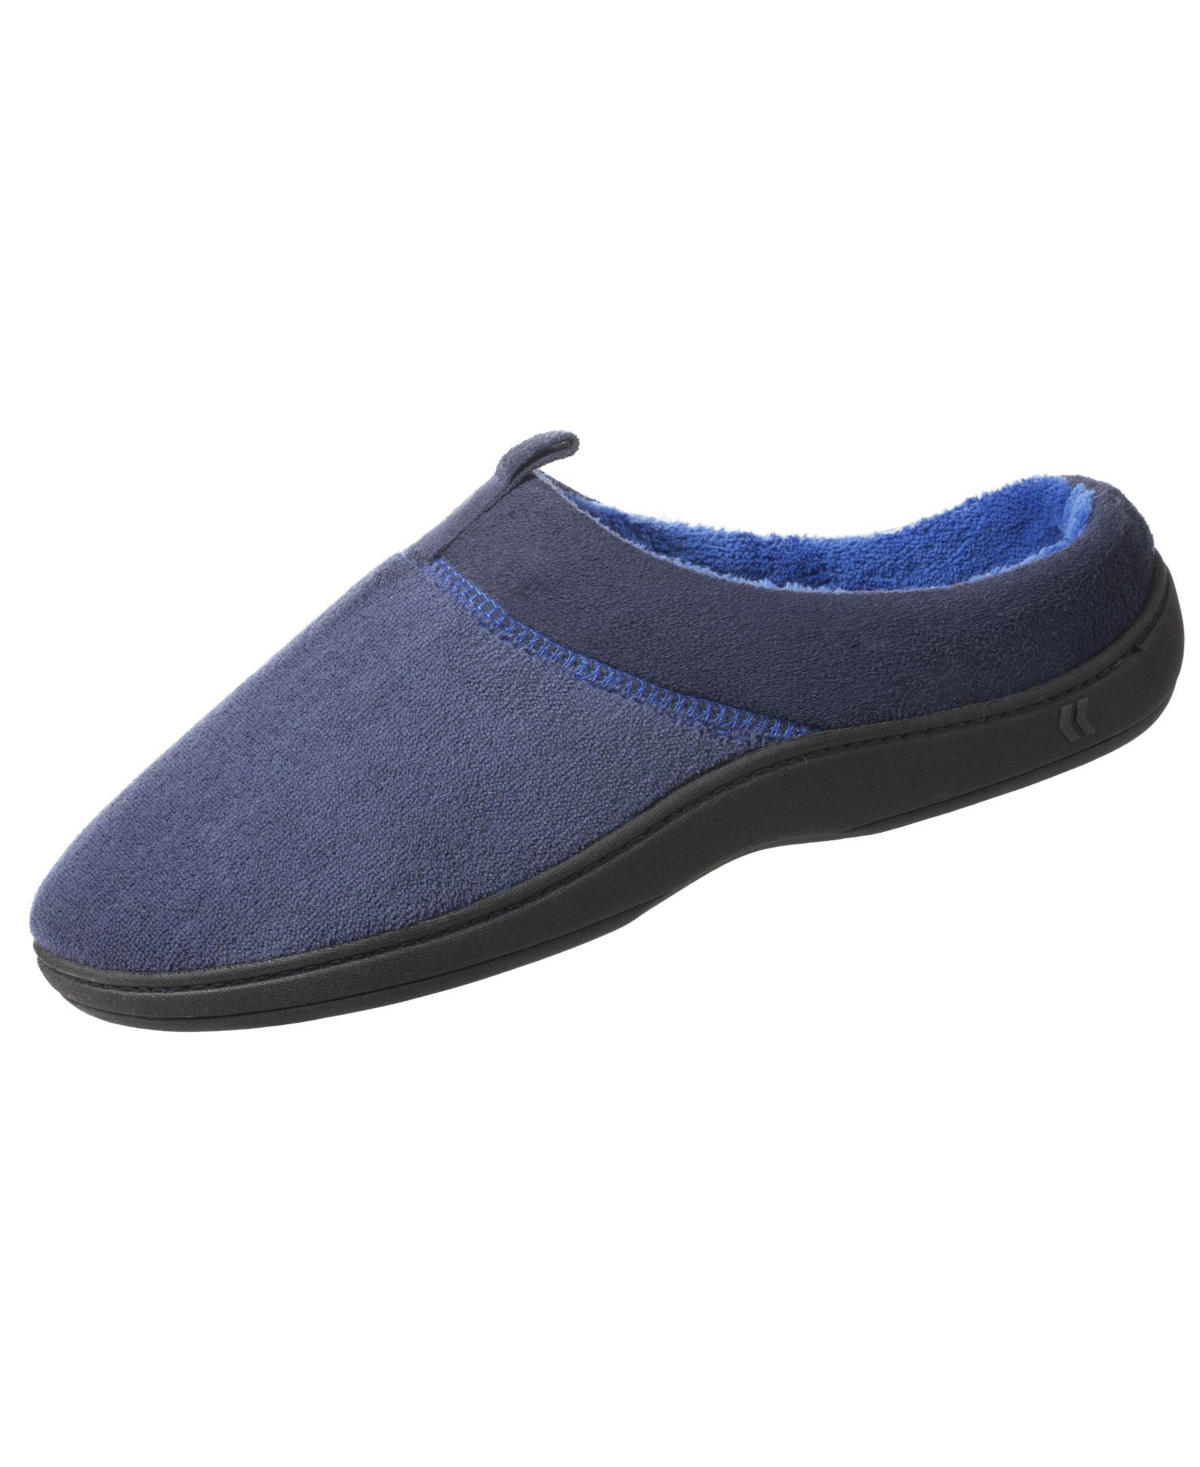 Isotoner Signature Men's Microterry Jared Hoodback Slippers with Memory Foam - Navy Blue